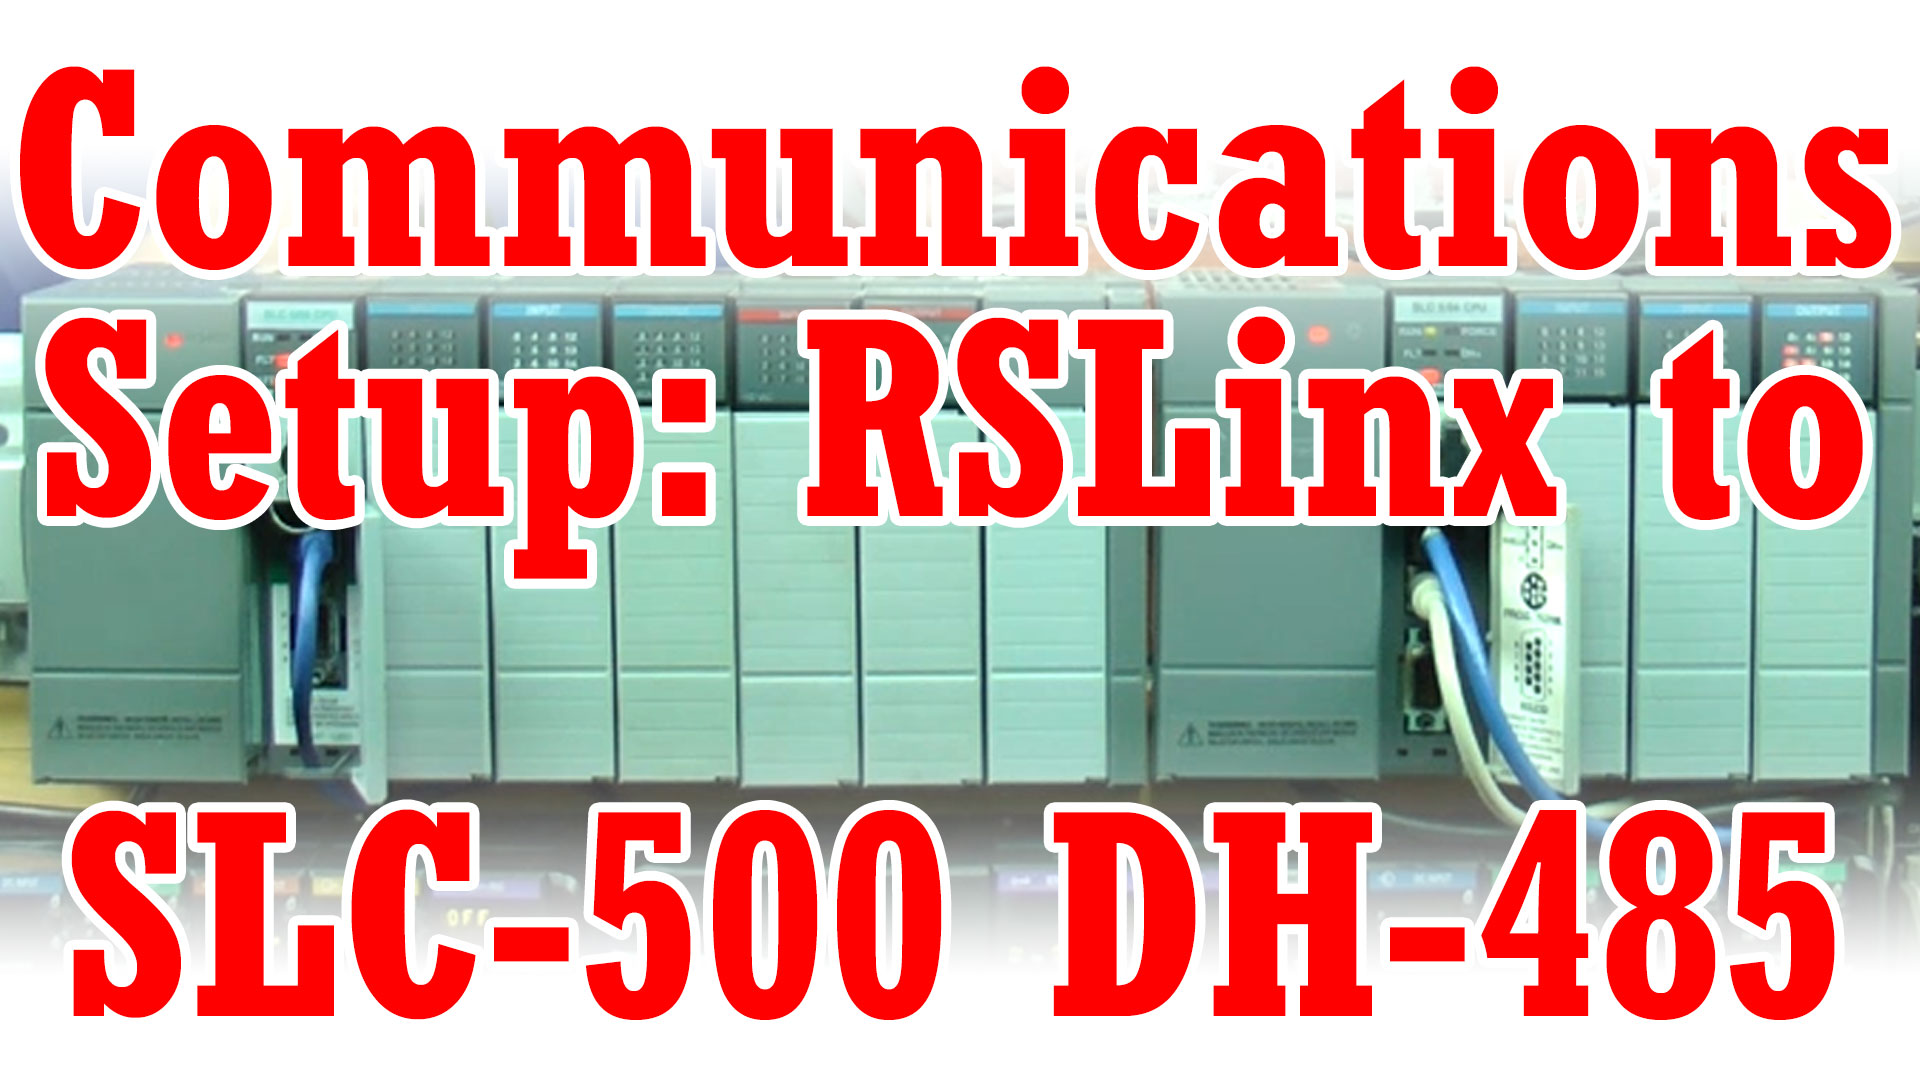 RSLogix, RSLinx - DH-485 Communications Setup and Downloading Programs to  (M3E17)